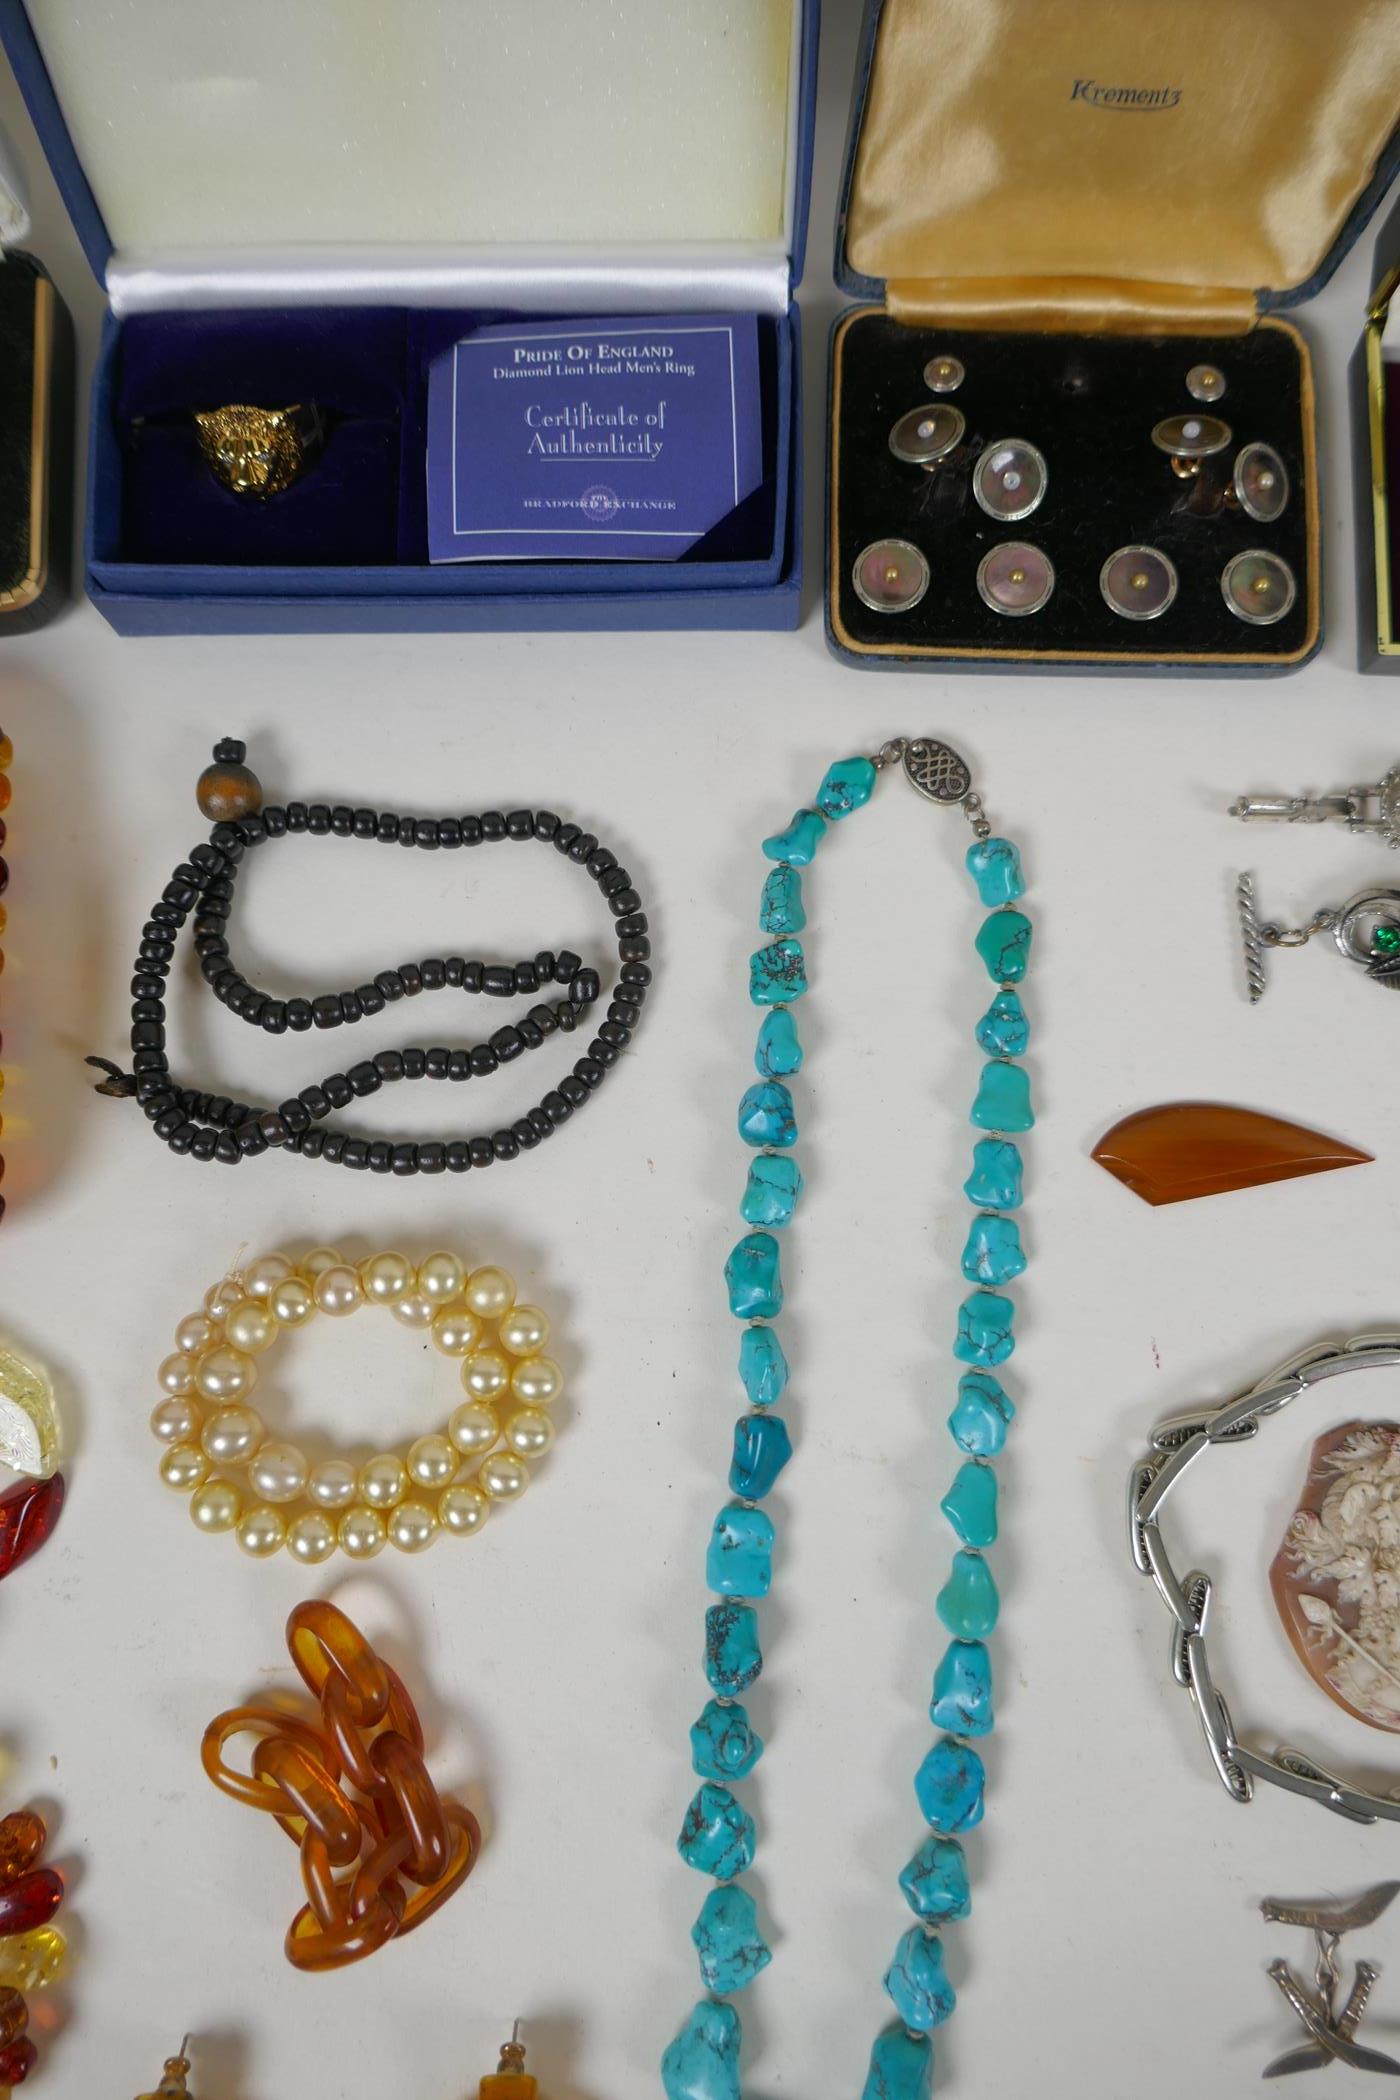 A collection of good quality vintage costume jewellery including brooches, necklaces, earrings, - Image 8 of 8